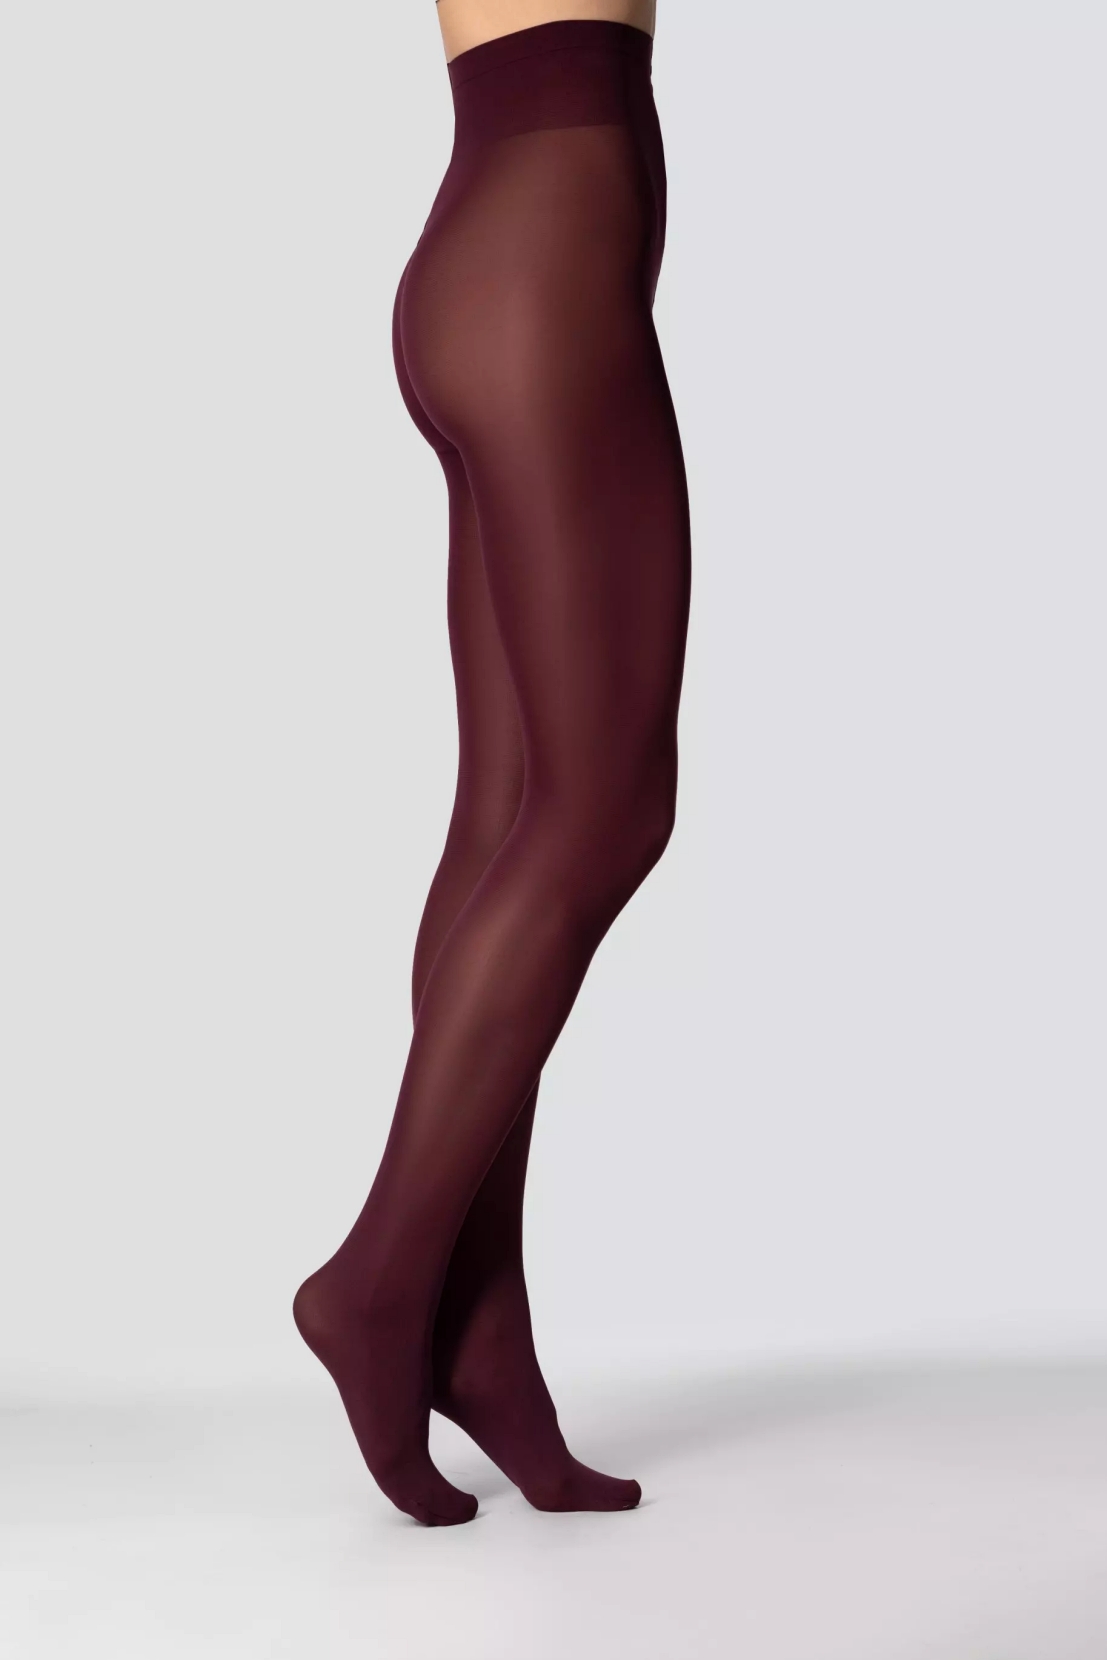 warme panty-soft-3d-60-red-wine-2